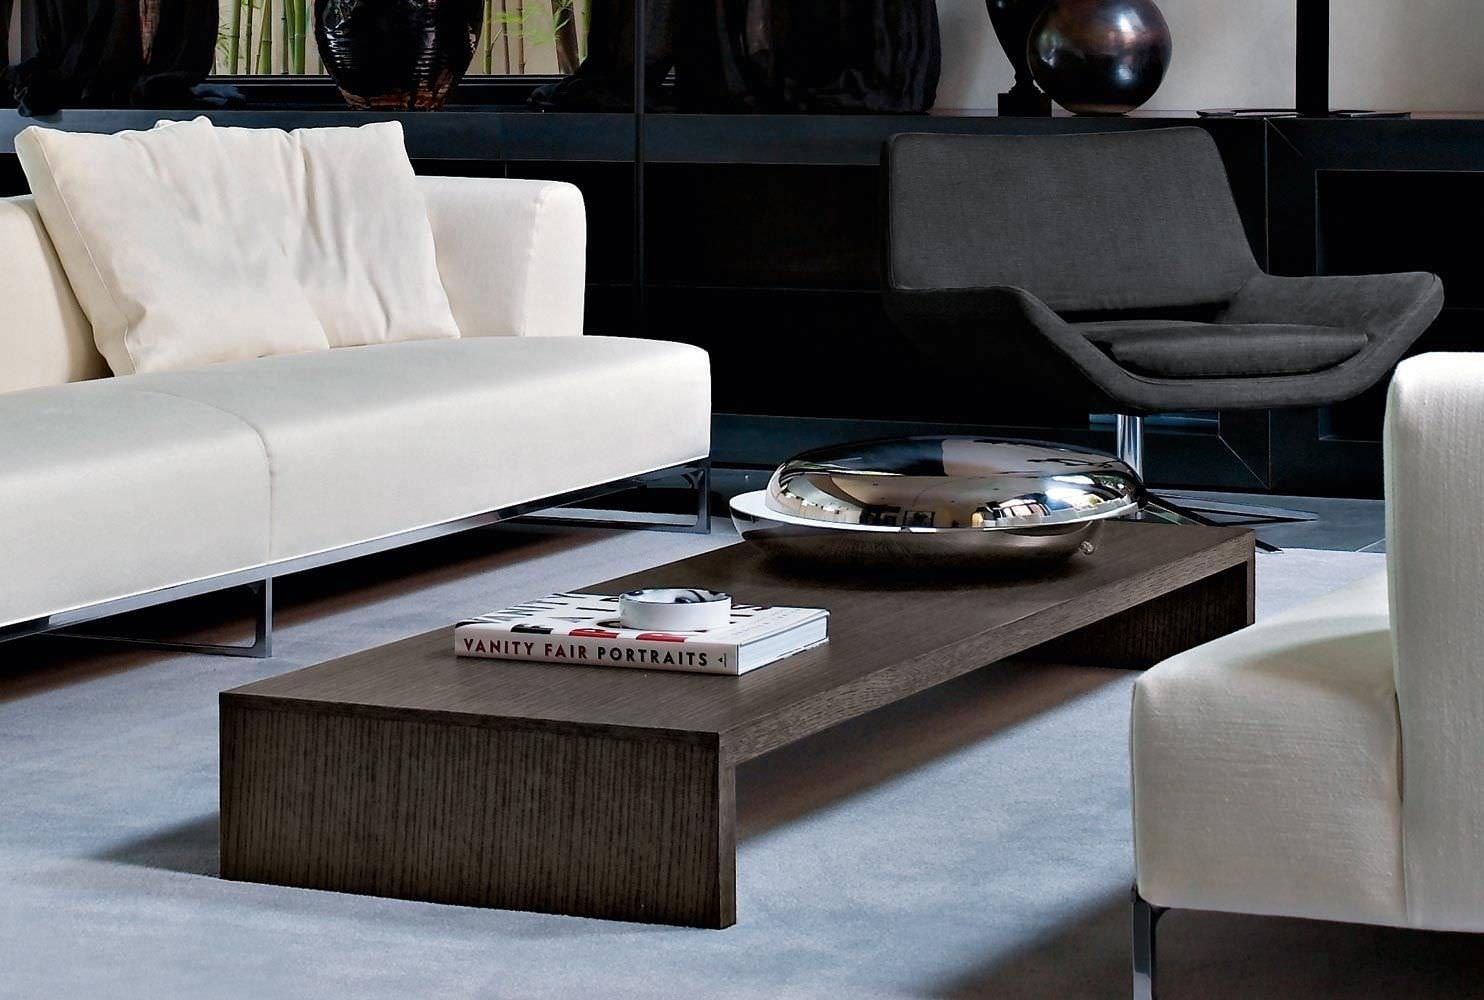 Several Cool Coffee Table To Serve The Best Welcoming Tone | Homesfeed Intended For Short Legs Coffee Tables (Photo 5 of 30)